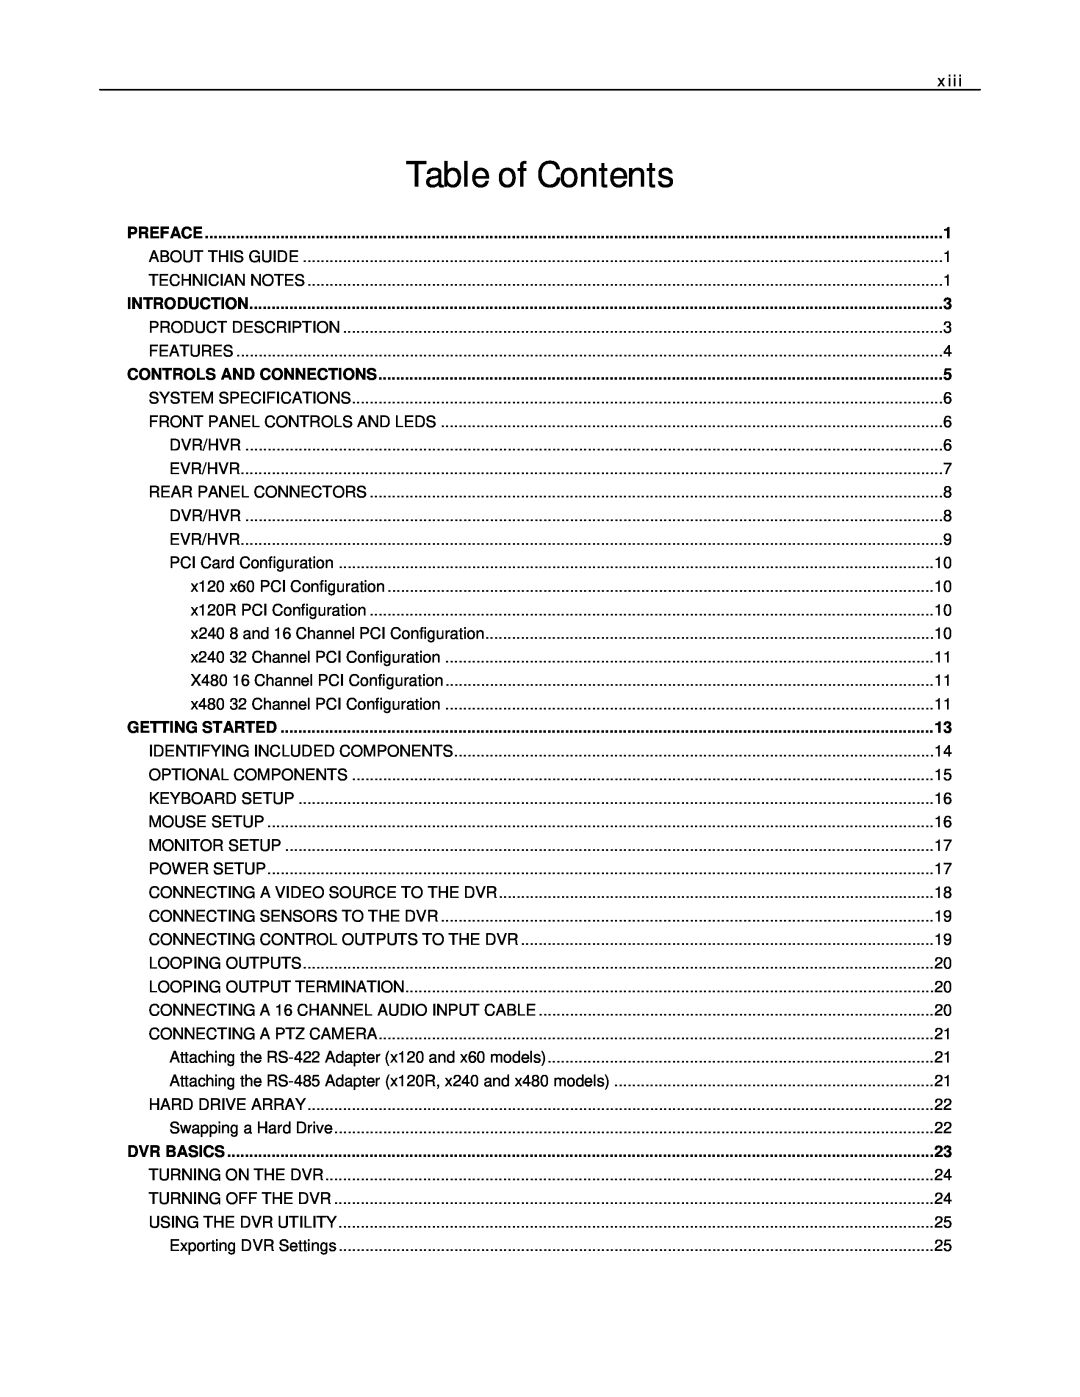 Toshiba EVR32-X xiii, Preface, Introduction, Controls And Connections, Getting Started, Dvr Basics, Table of Contents 